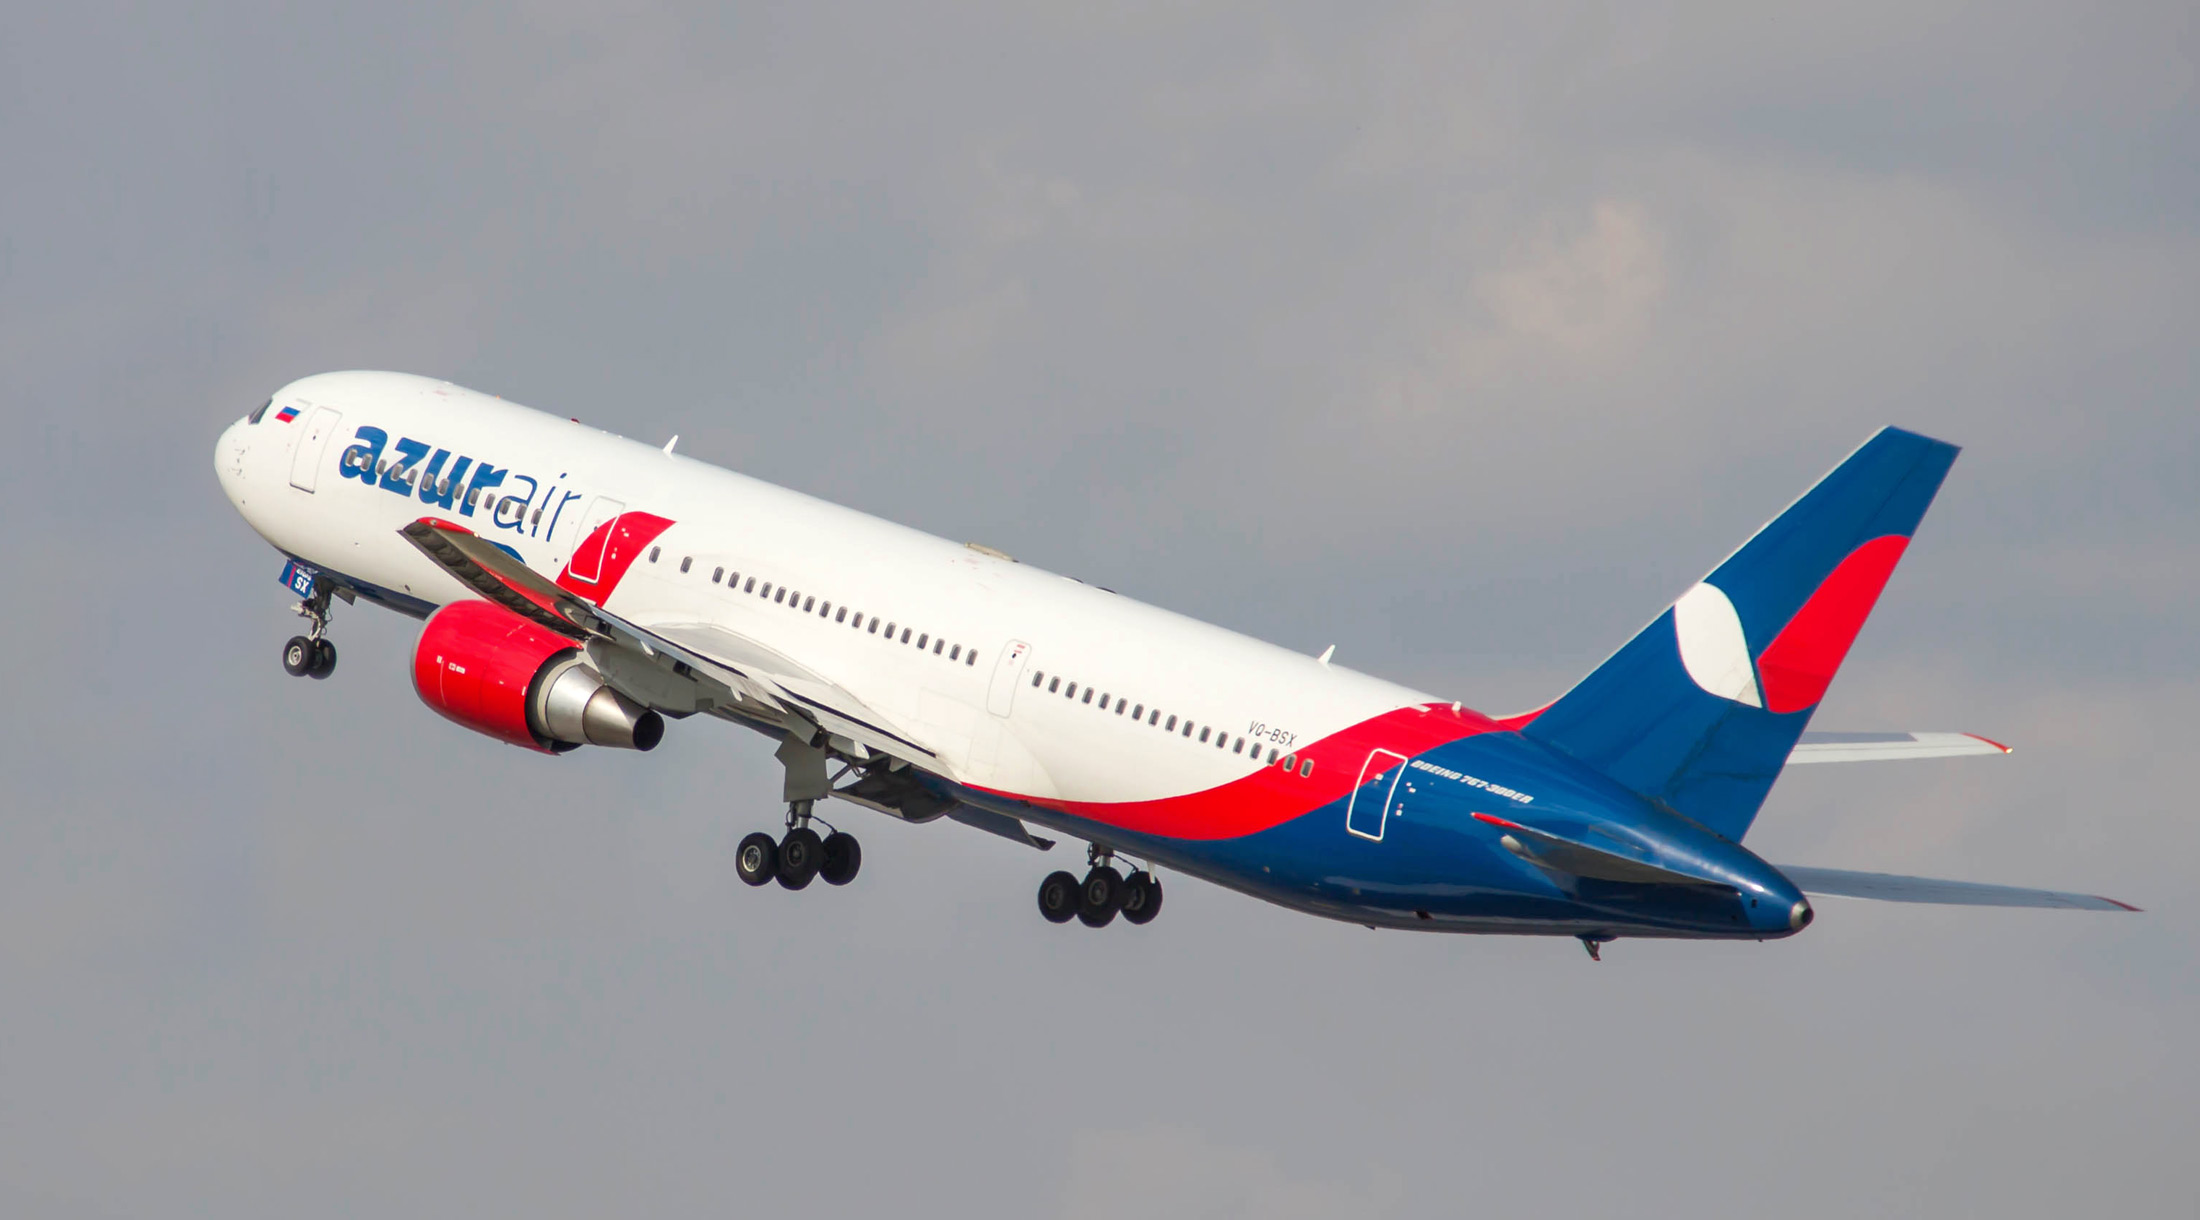 AZUR air News, May 20, 2019. AZUR air is now providing services to tourists visiting Russia.